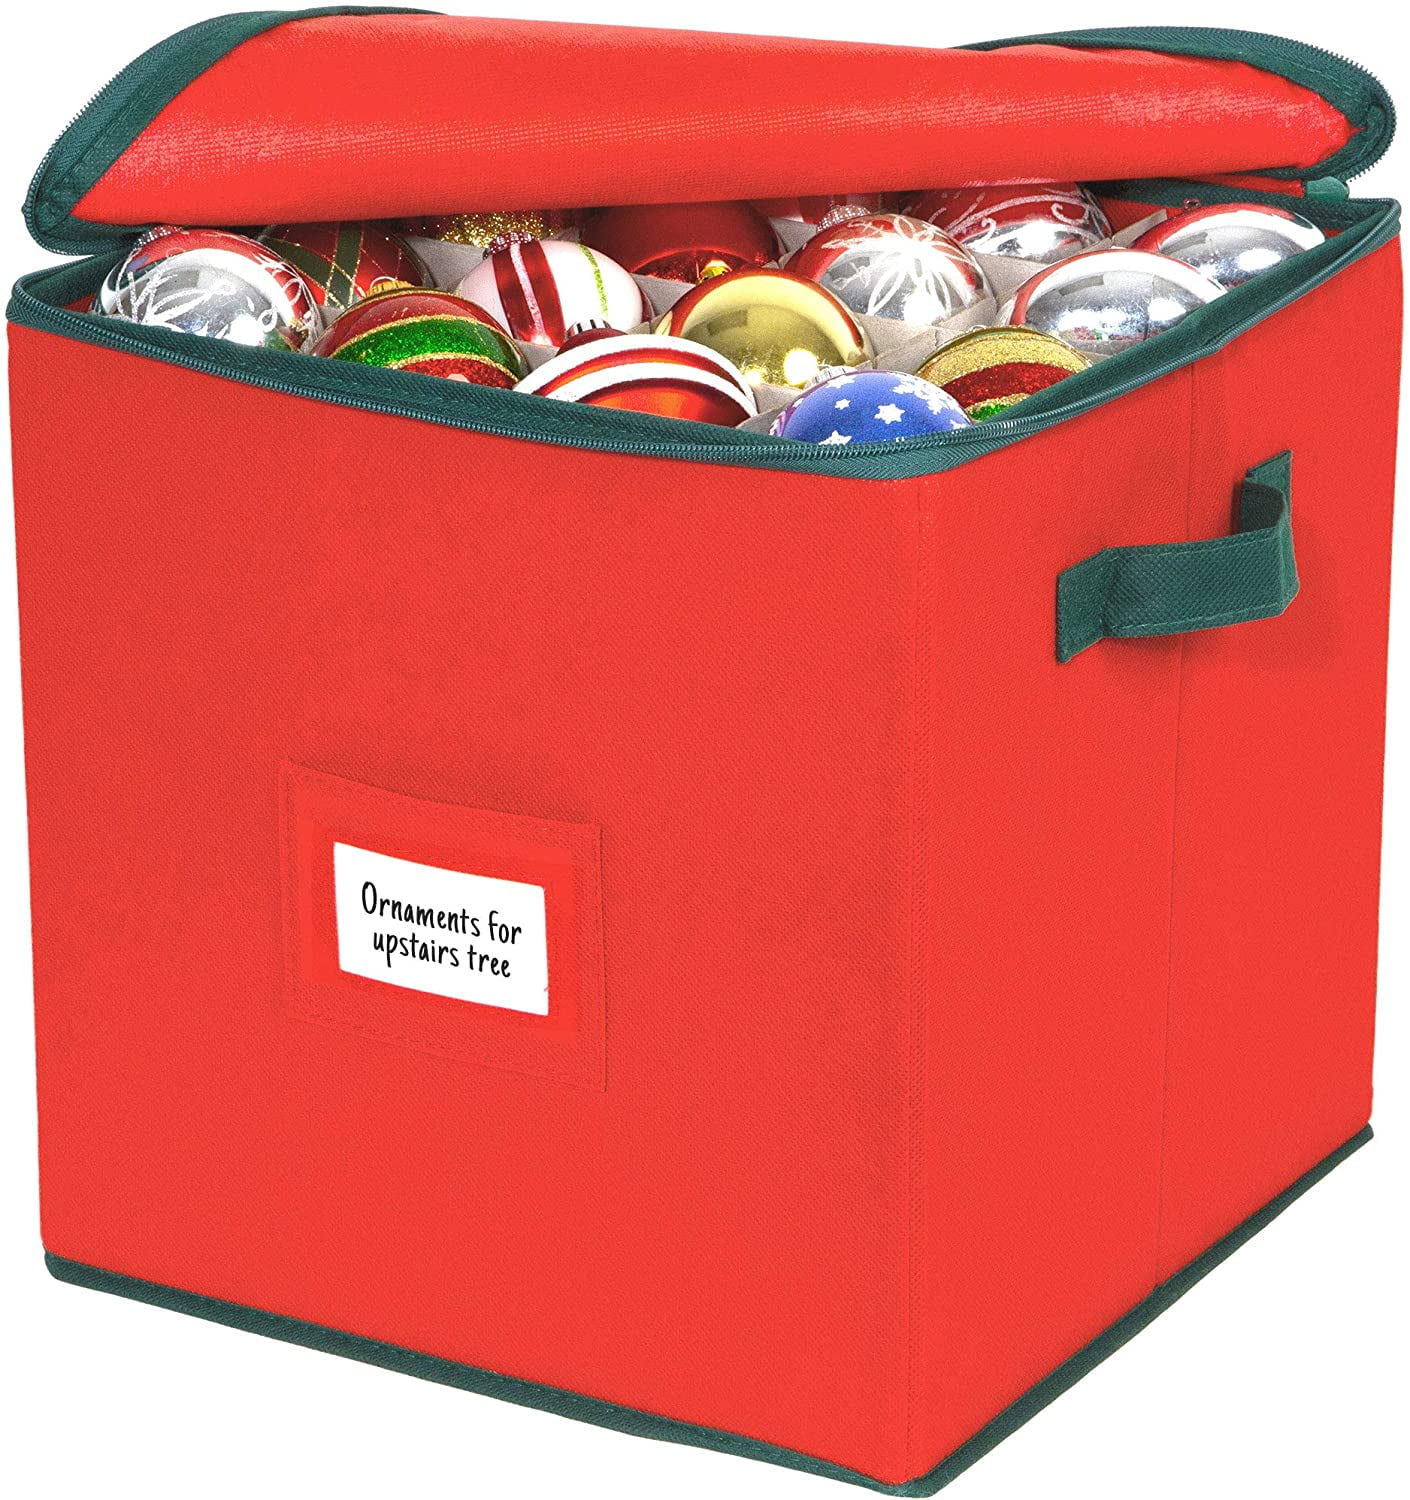 Glomery Christmas Ornament Box, Adjustable Dividers Stores Up to 64 Ornaments - Red Stars